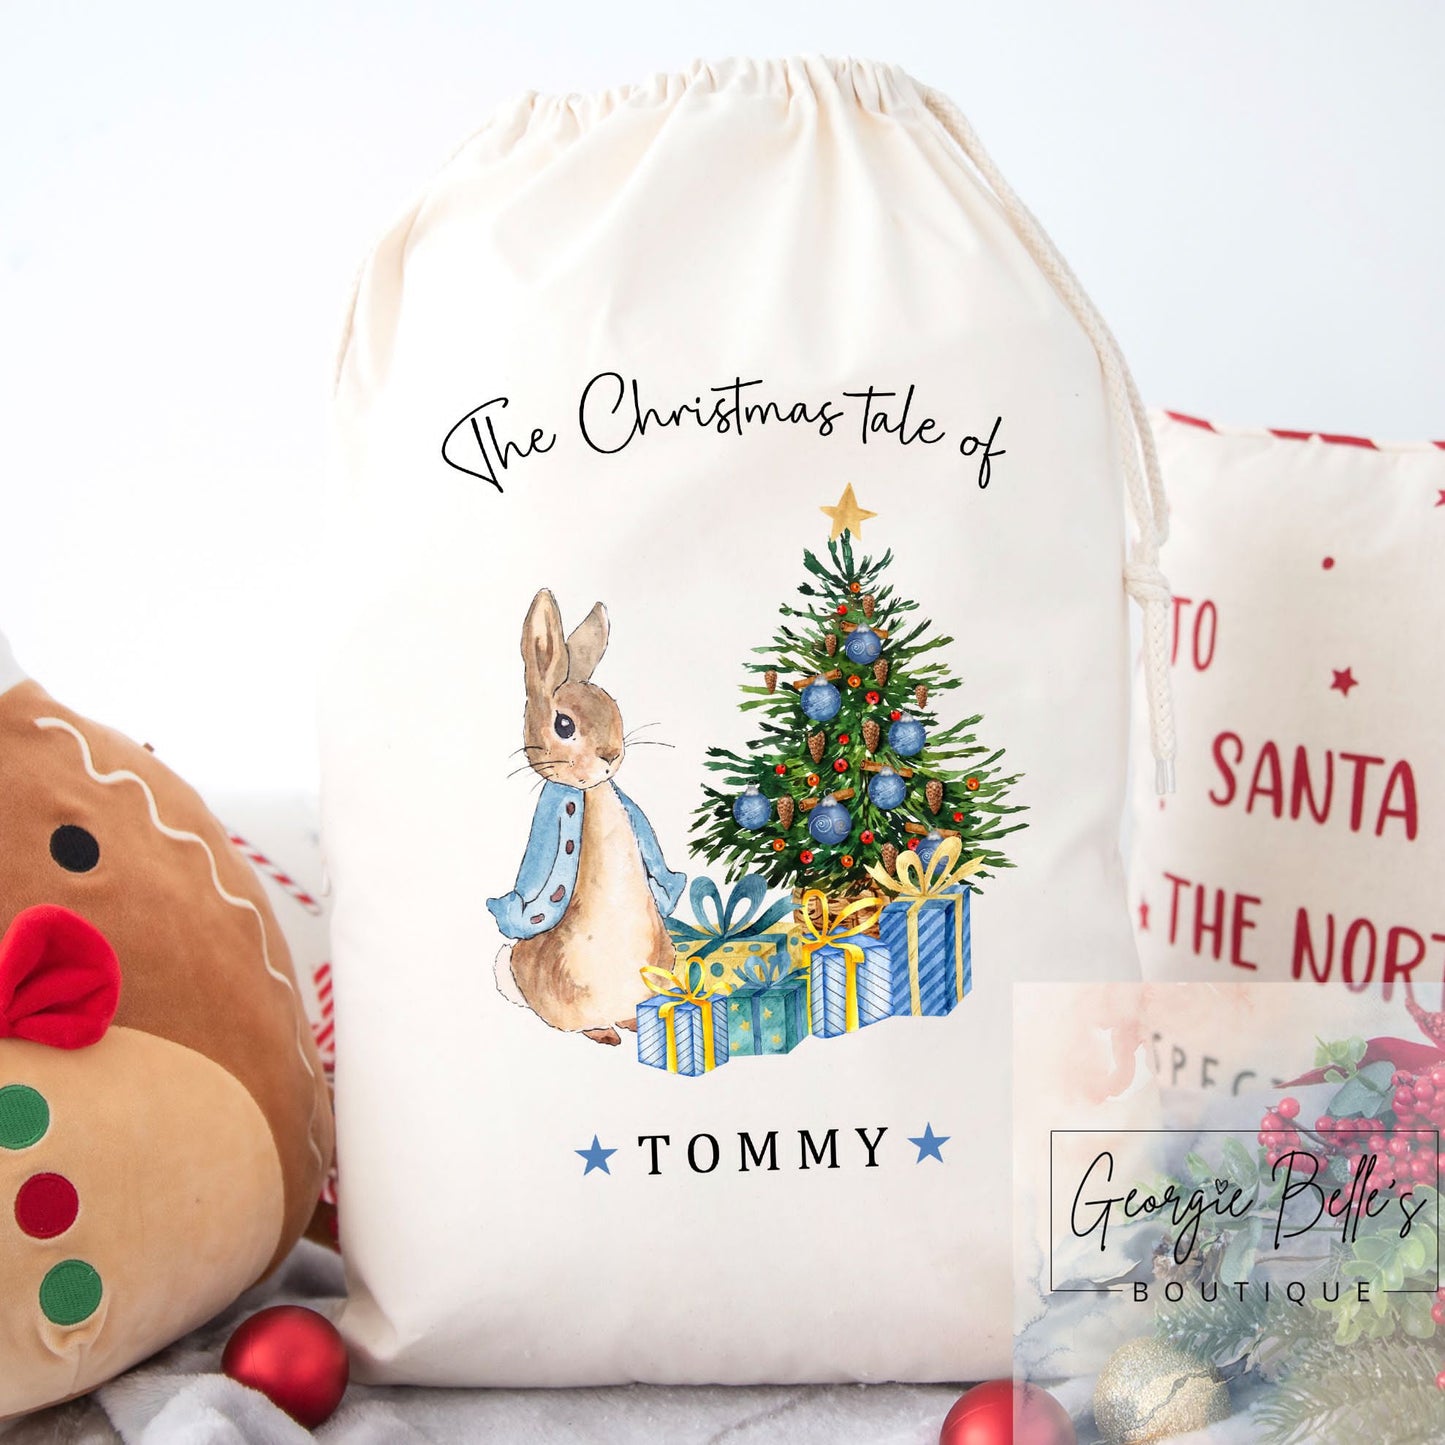 Luxury Personalised Premium Cotton Christmas Sack - Blue ‘The Christmas Tales Of’ Design